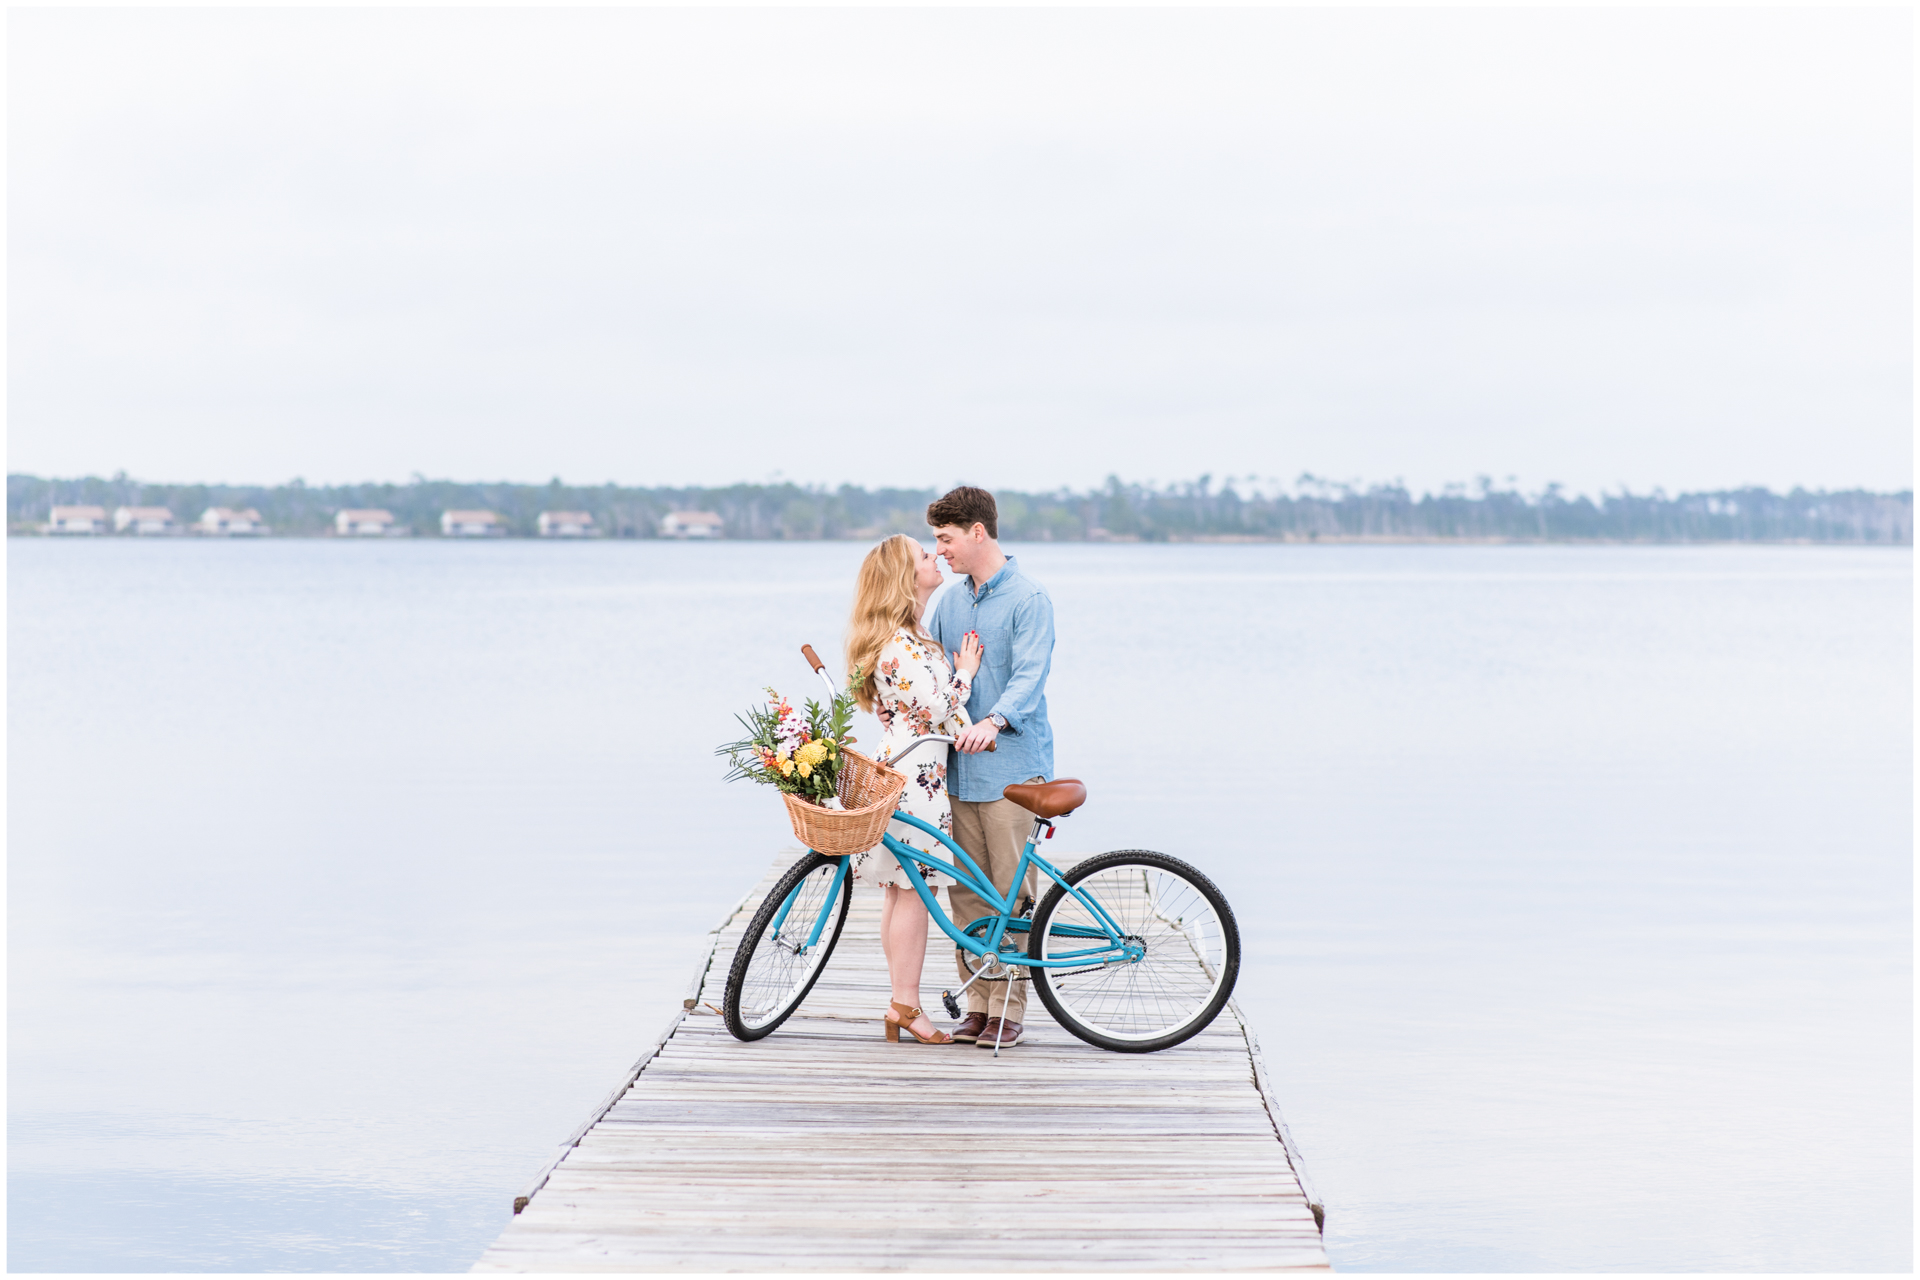 Engagement session on the beach with a bike bicycle